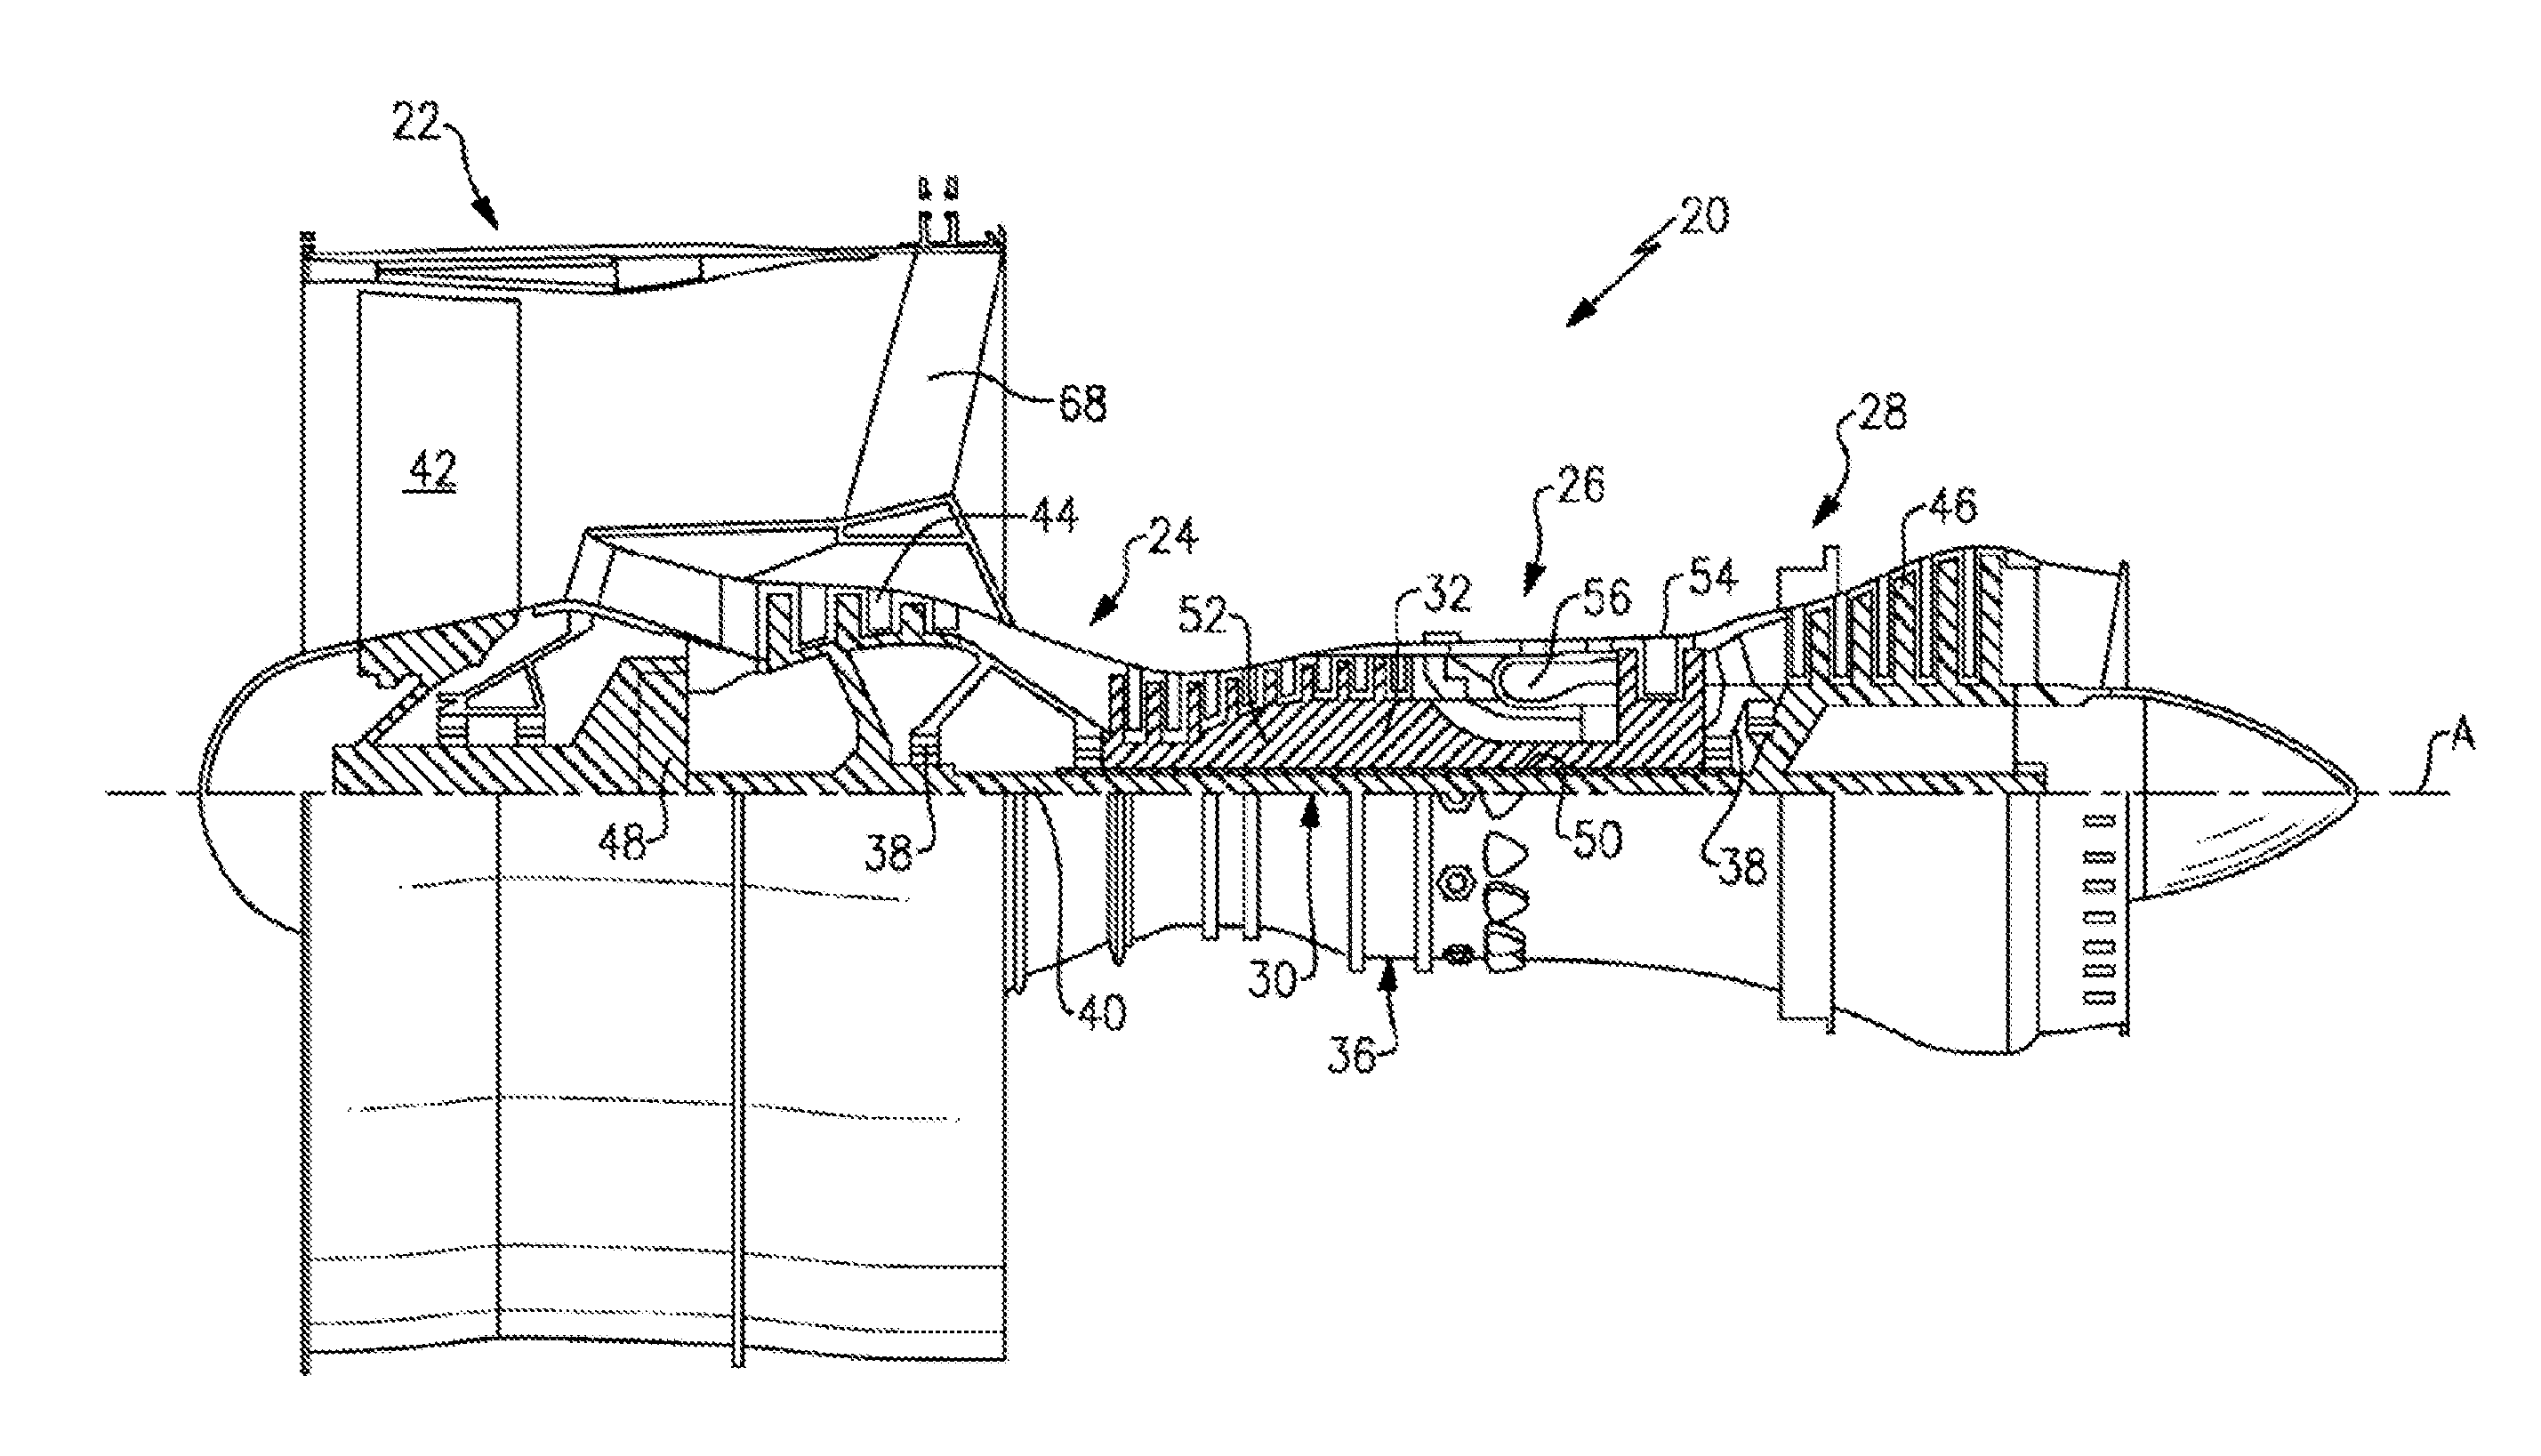 Method of operating a multi-pack enviromental control system